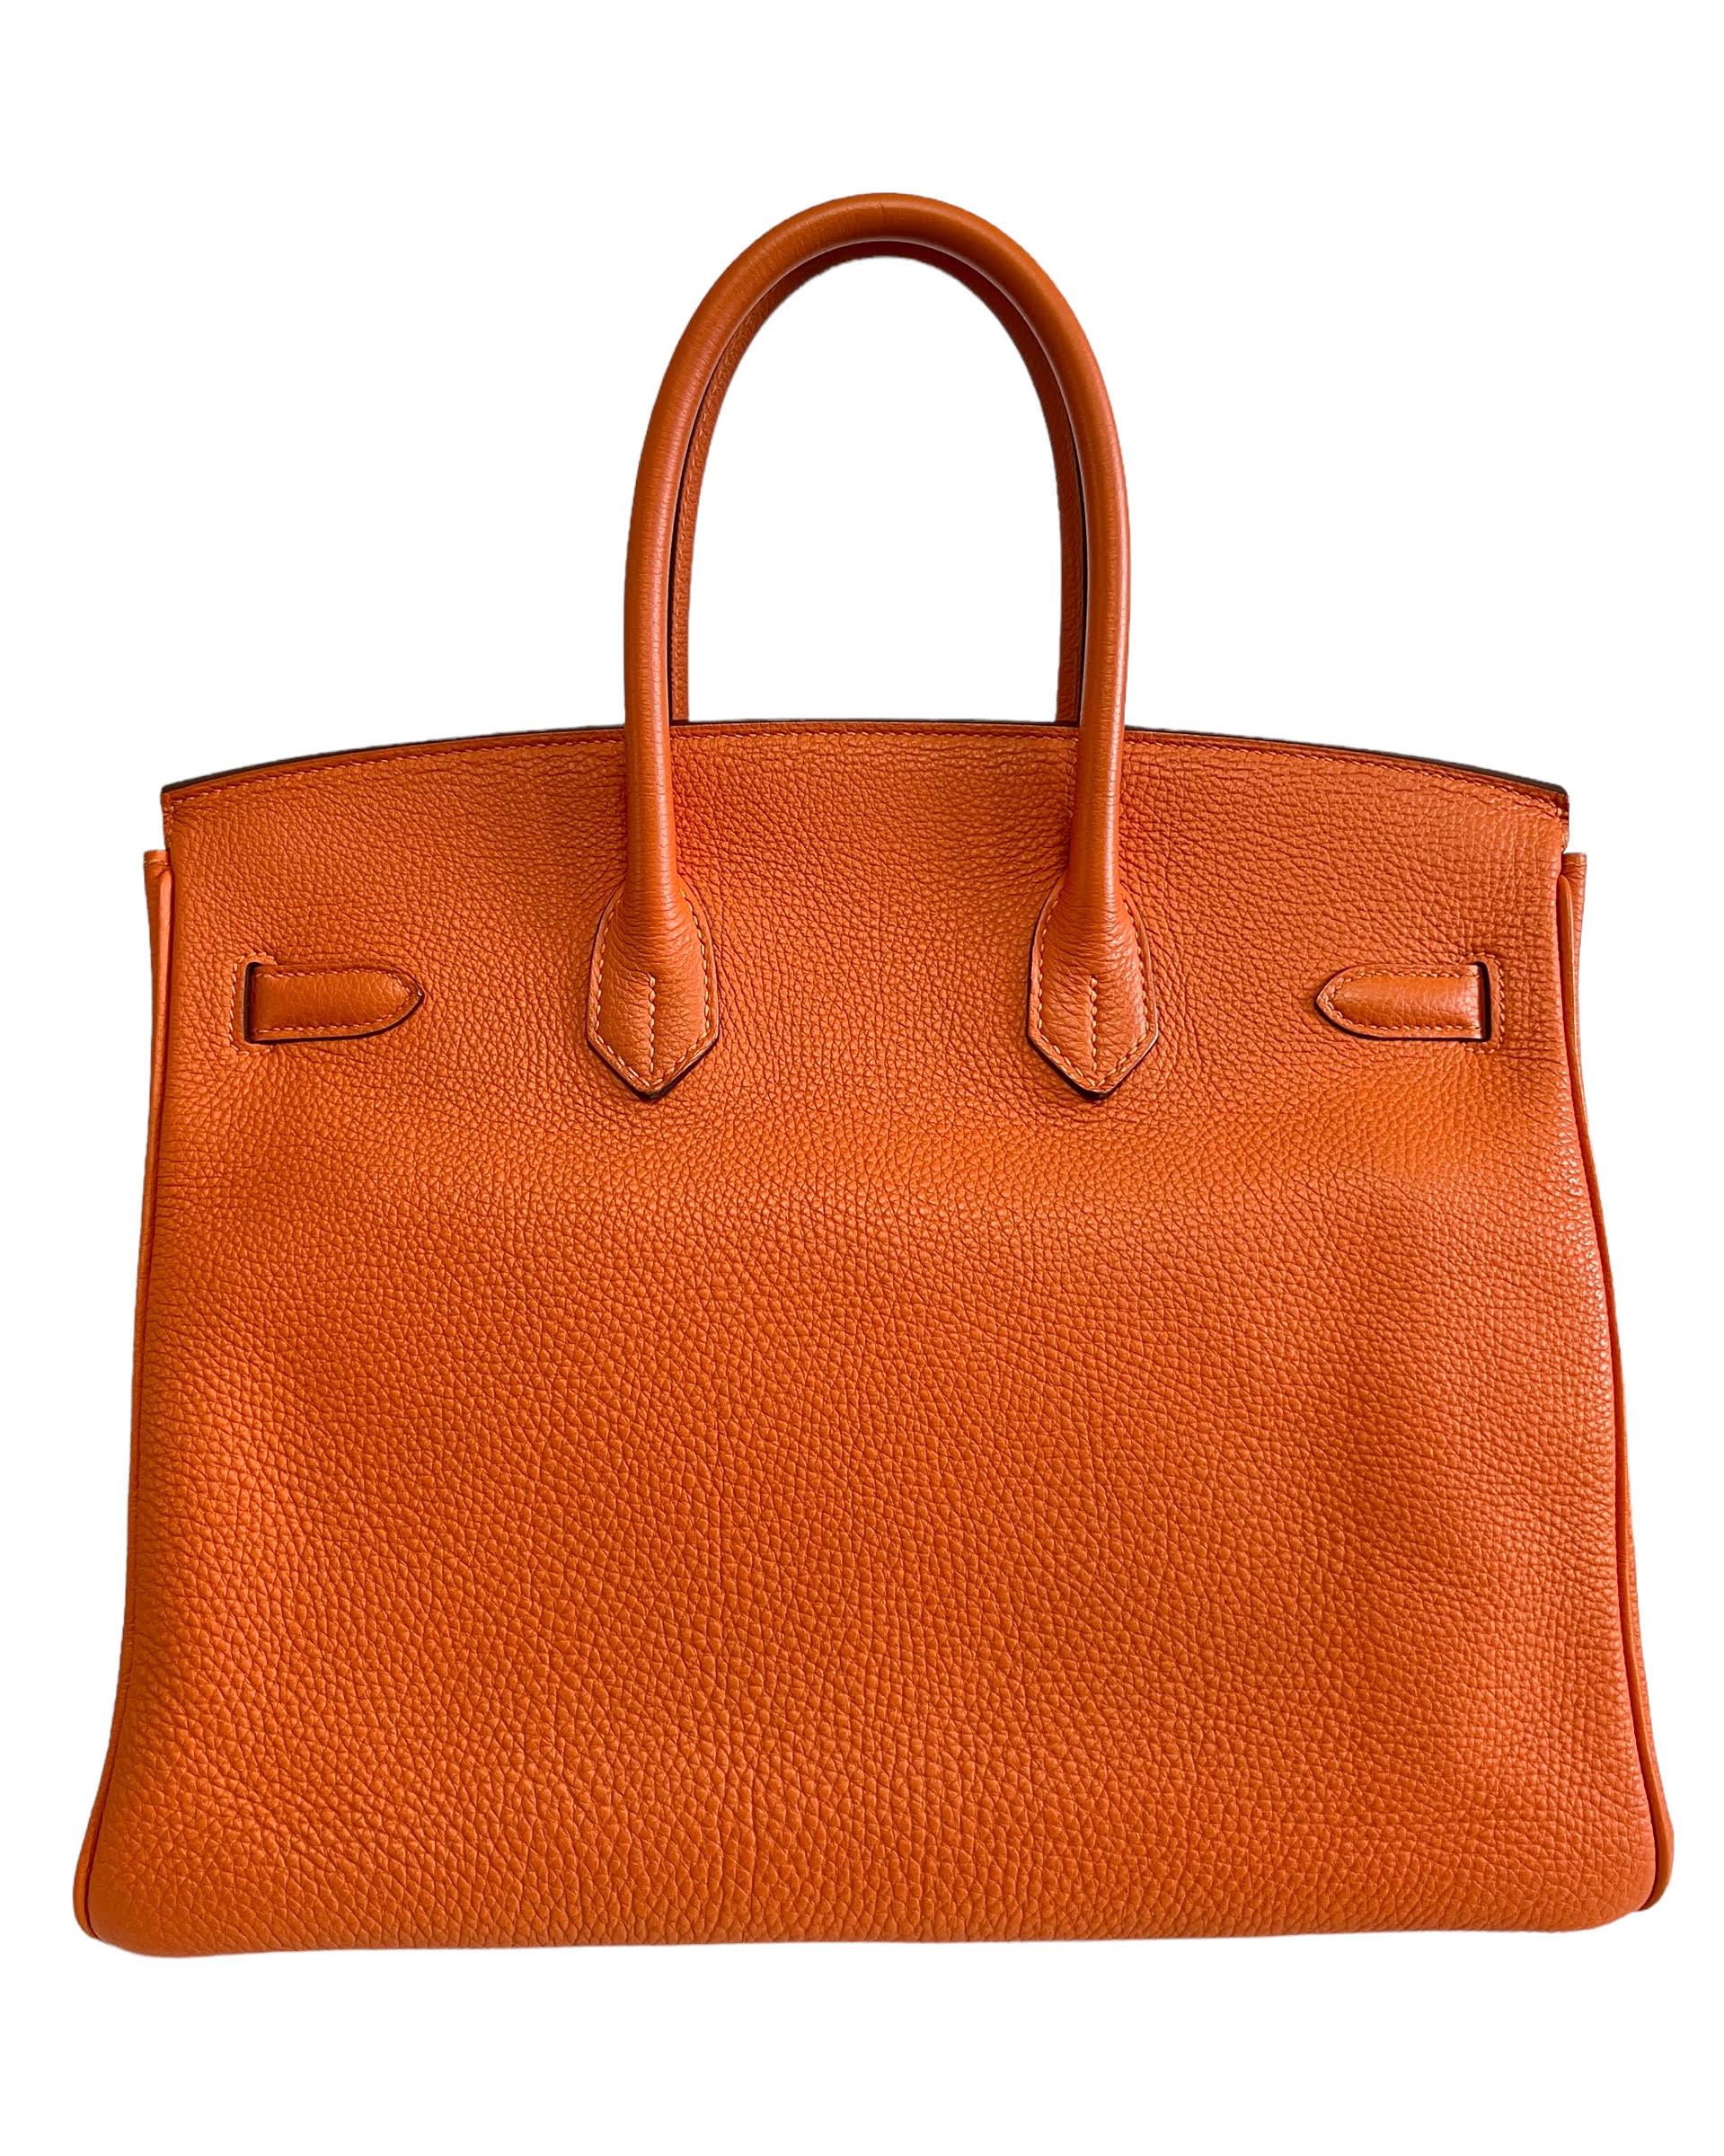 This authentic Hermès Orange Togo 35 cm Birkin is in pristine unworn condition with the protective plastic intact on the hardware.  Waitlists exceeding a year are commonplace for the intensely coveted classic leather Birkin bag.  Each piece is hand